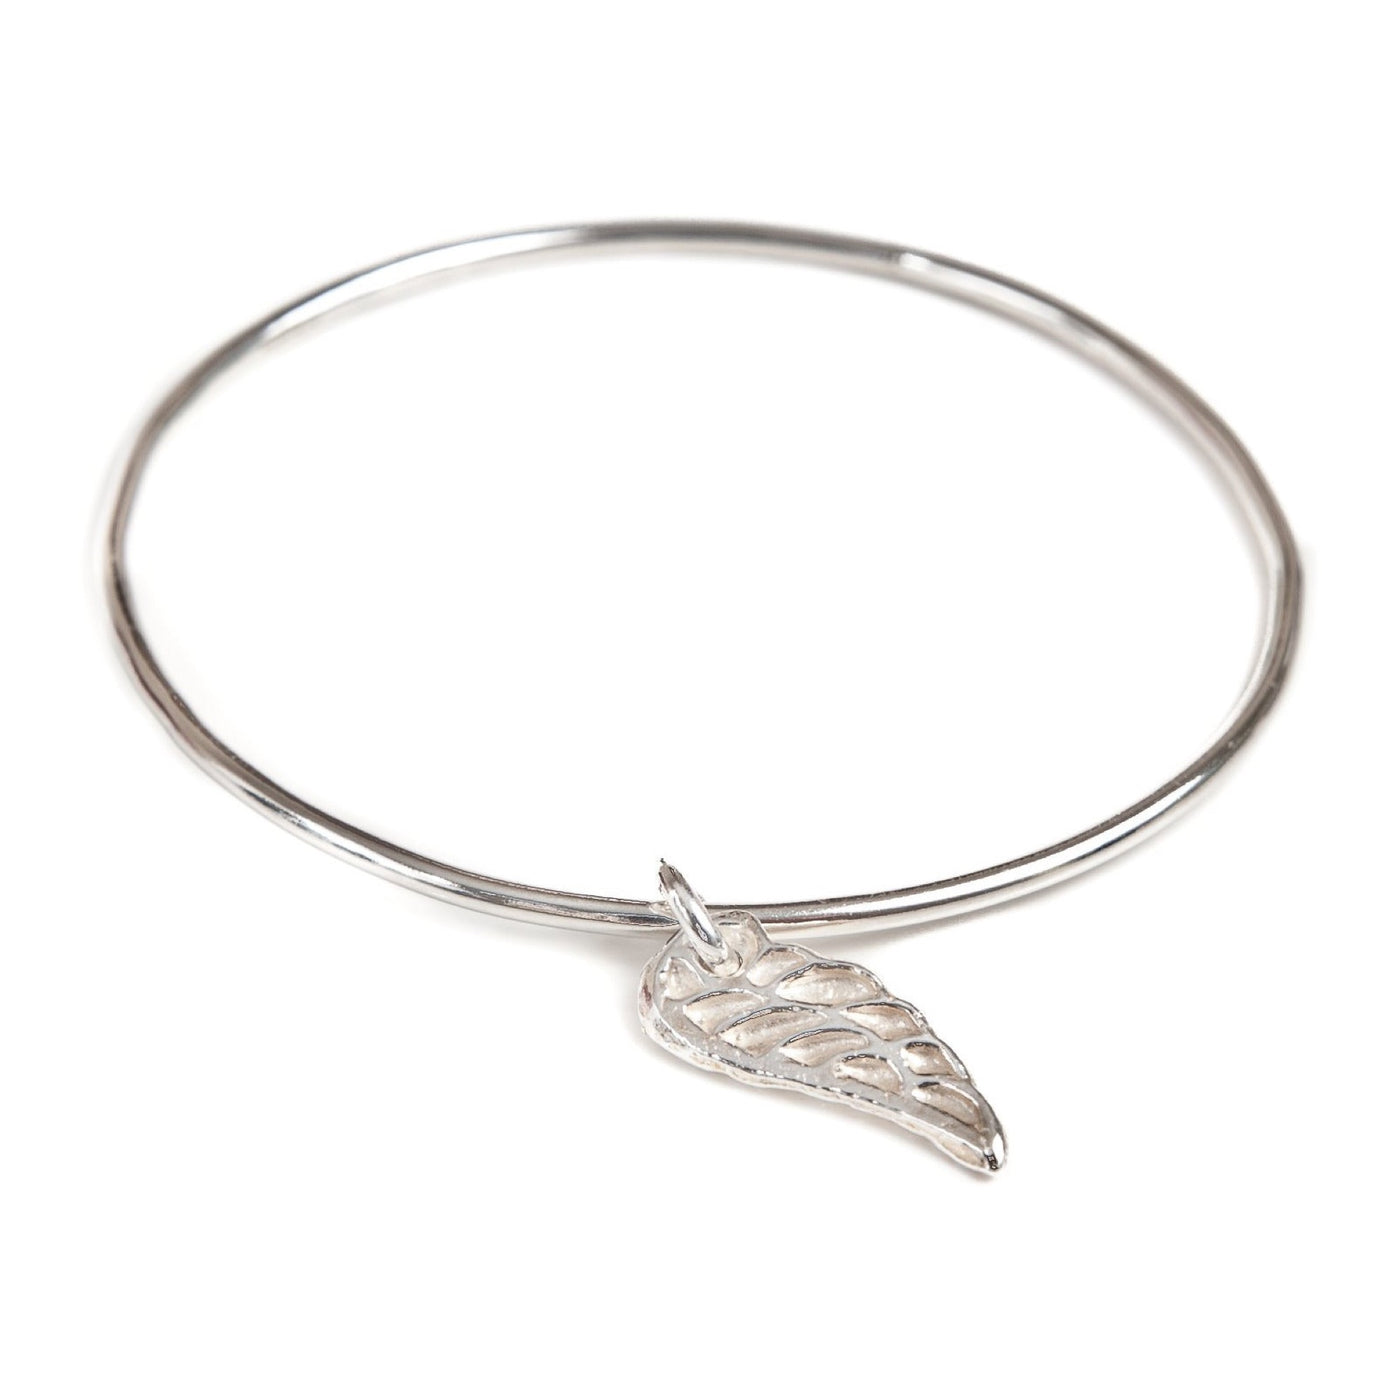 Delicate Angel Wing Bangle